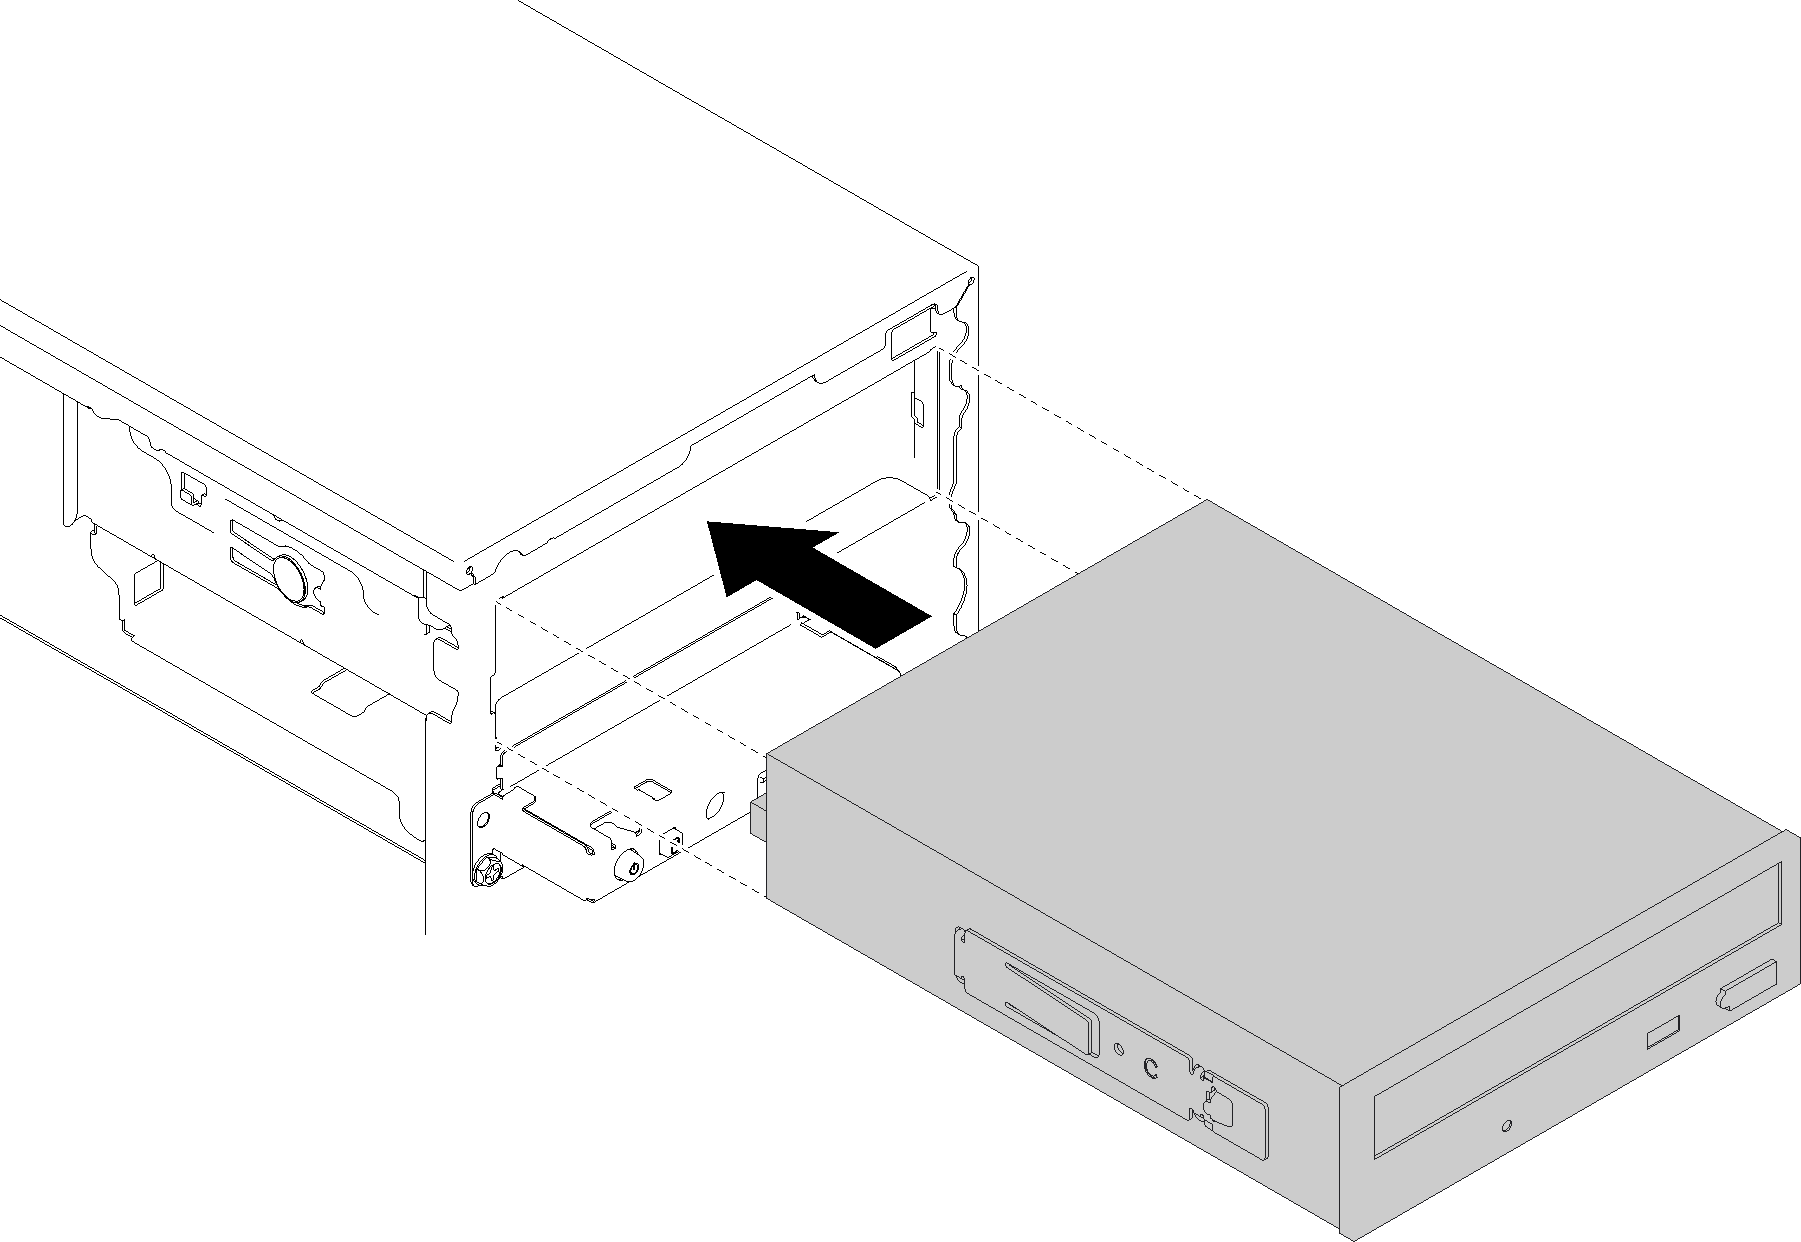 Installing the optical drive assembly